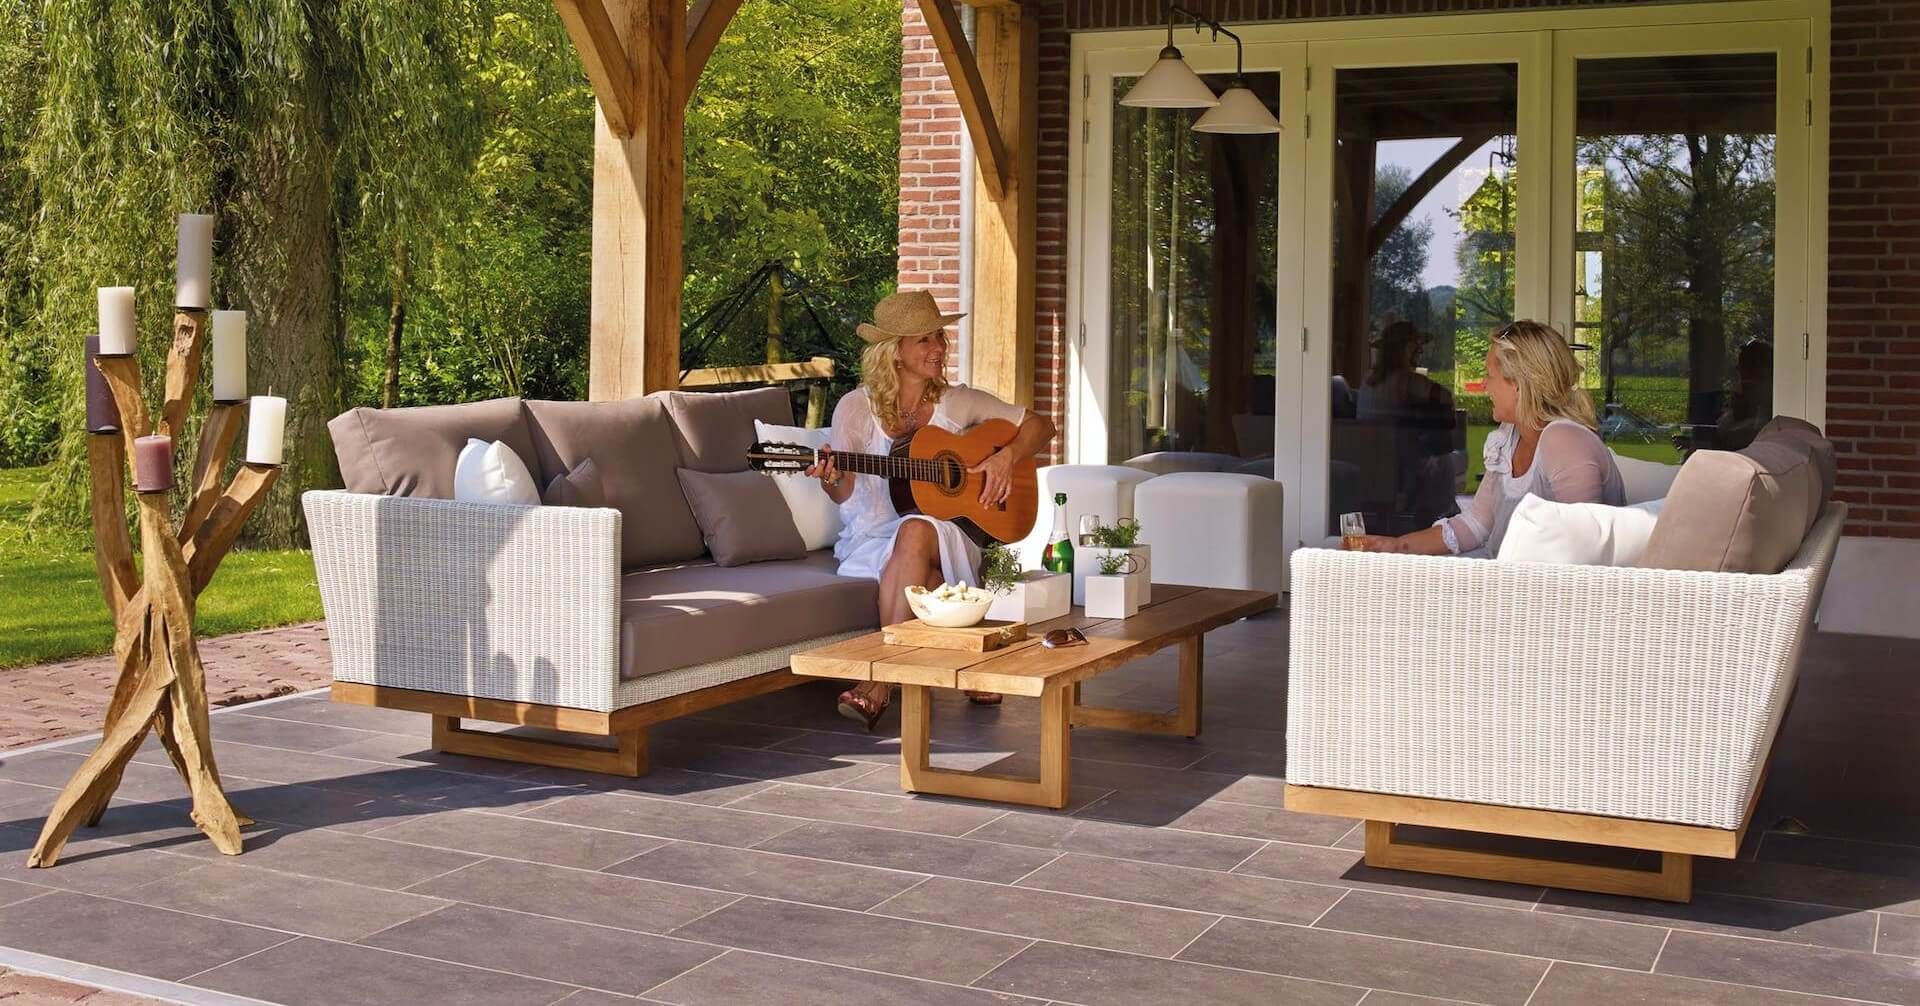 Boost the beauty of your outdoor property with these beautiful concrete patio finishes.